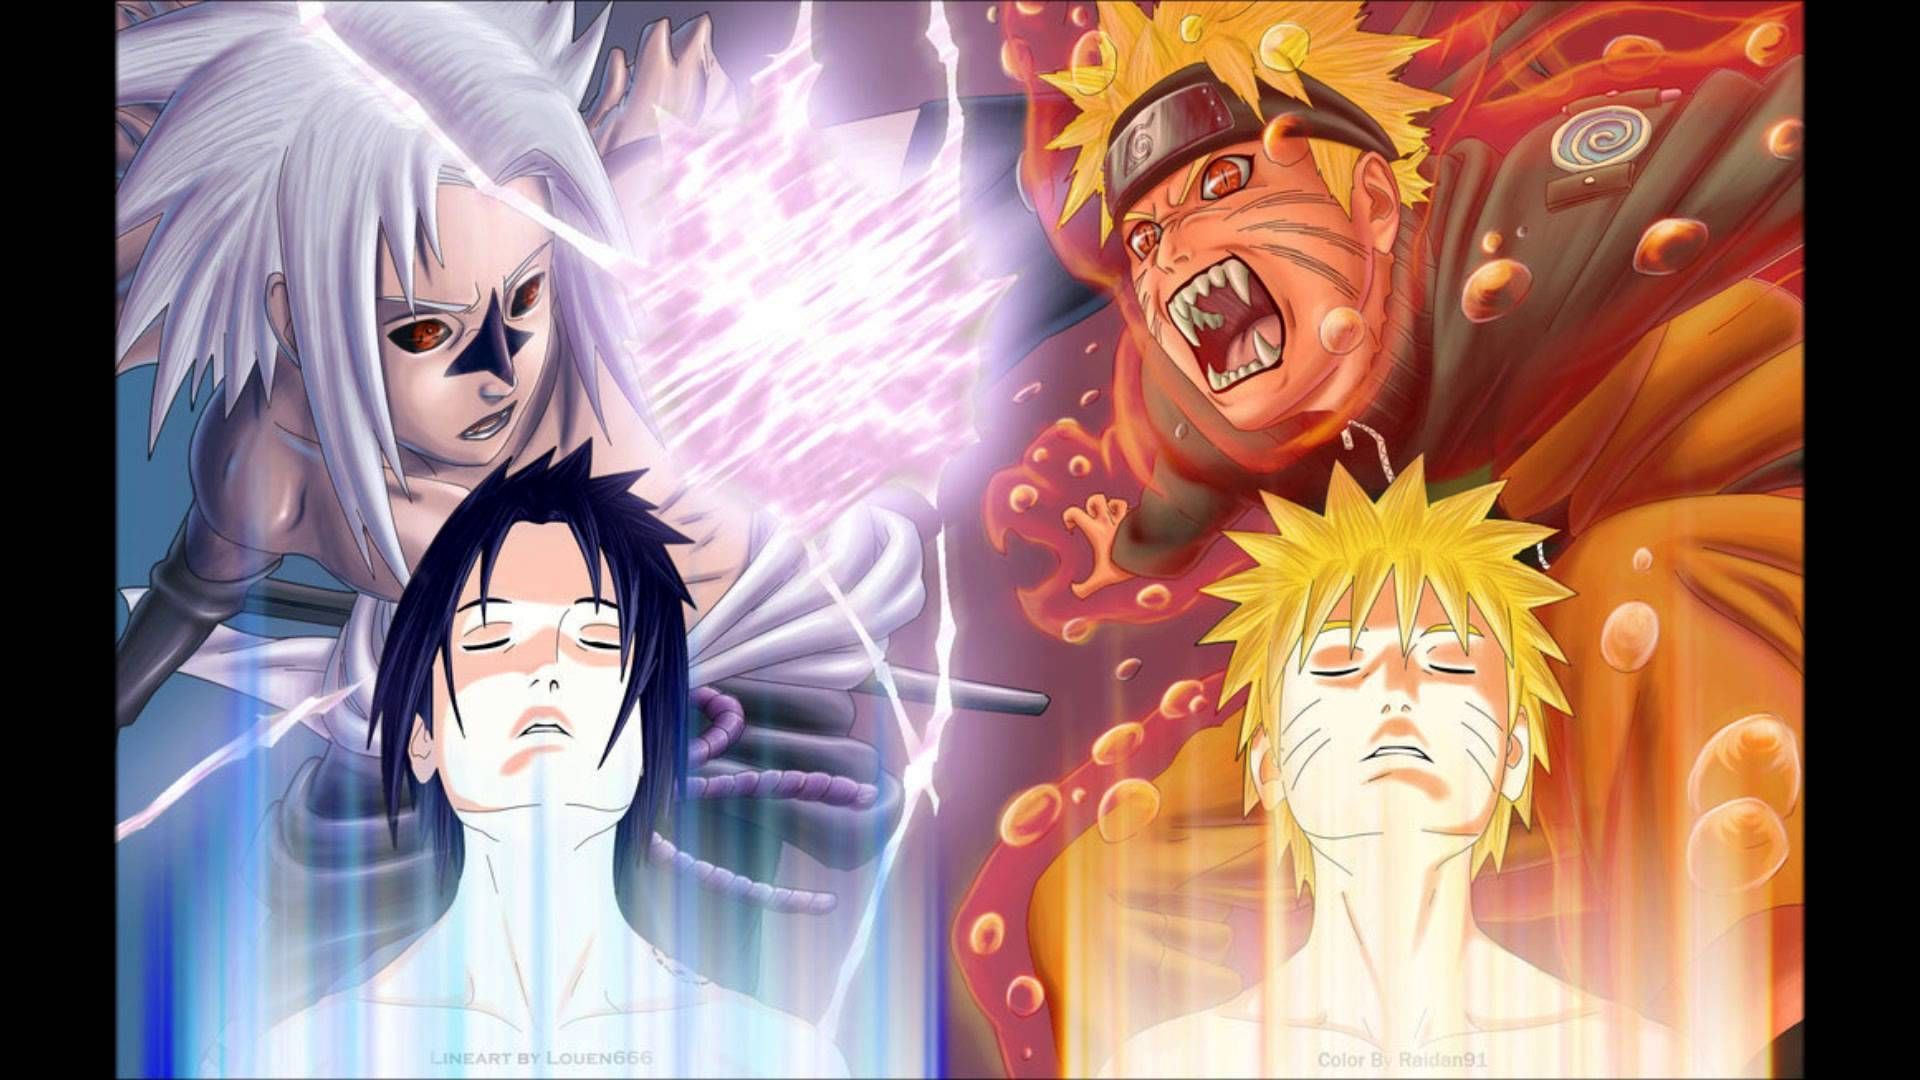 naruto and sasuke in there ultimate form. Naruto and sasuke wallpaper, Naruto and sasuke, Anime